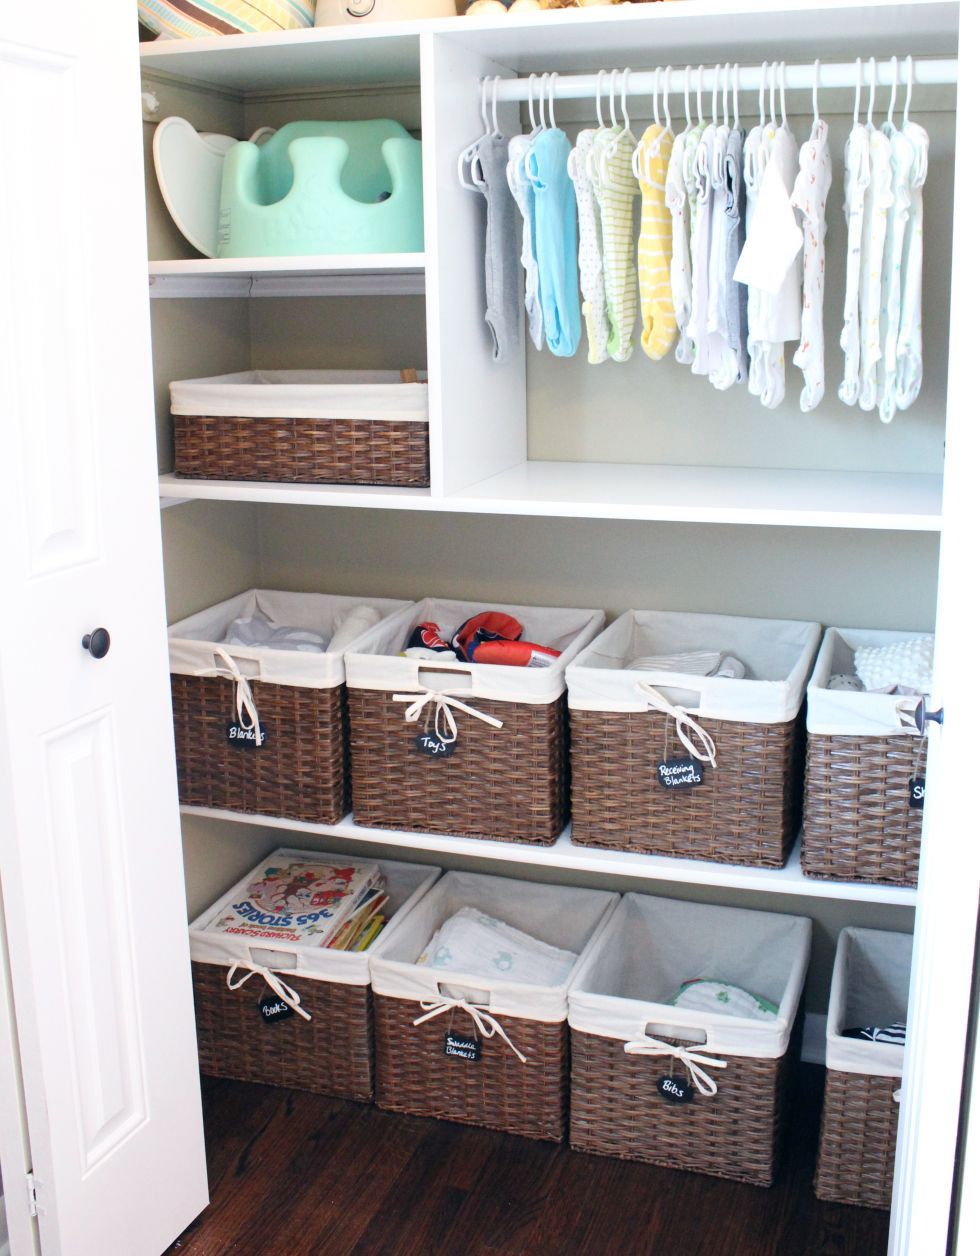 nursery closet organization. I love love love being organized…. So I shall have to do this.